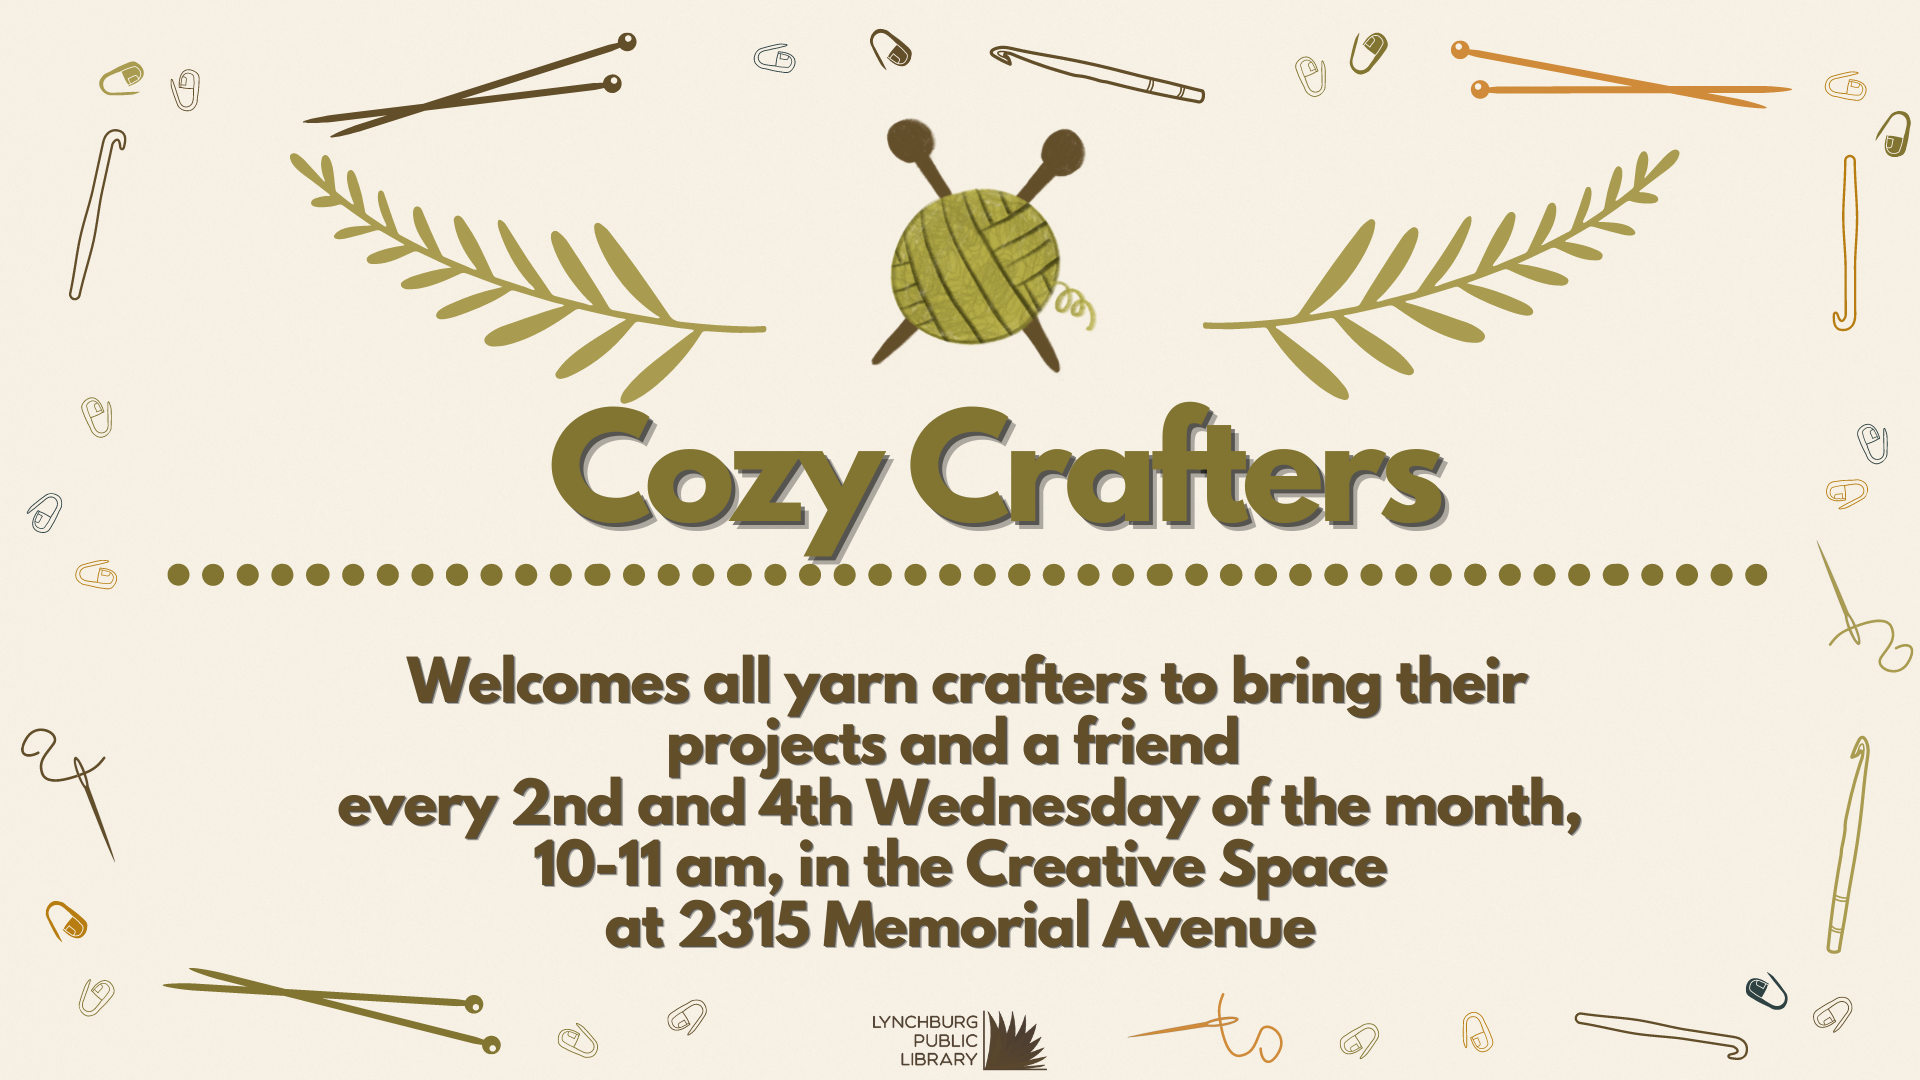 Welcomes all yarn crafters to bring their projects and a friend  every 2nd and 4th Wednesday of the month,  10-11 am in the Creative Space at 2315 Memorial Avenue